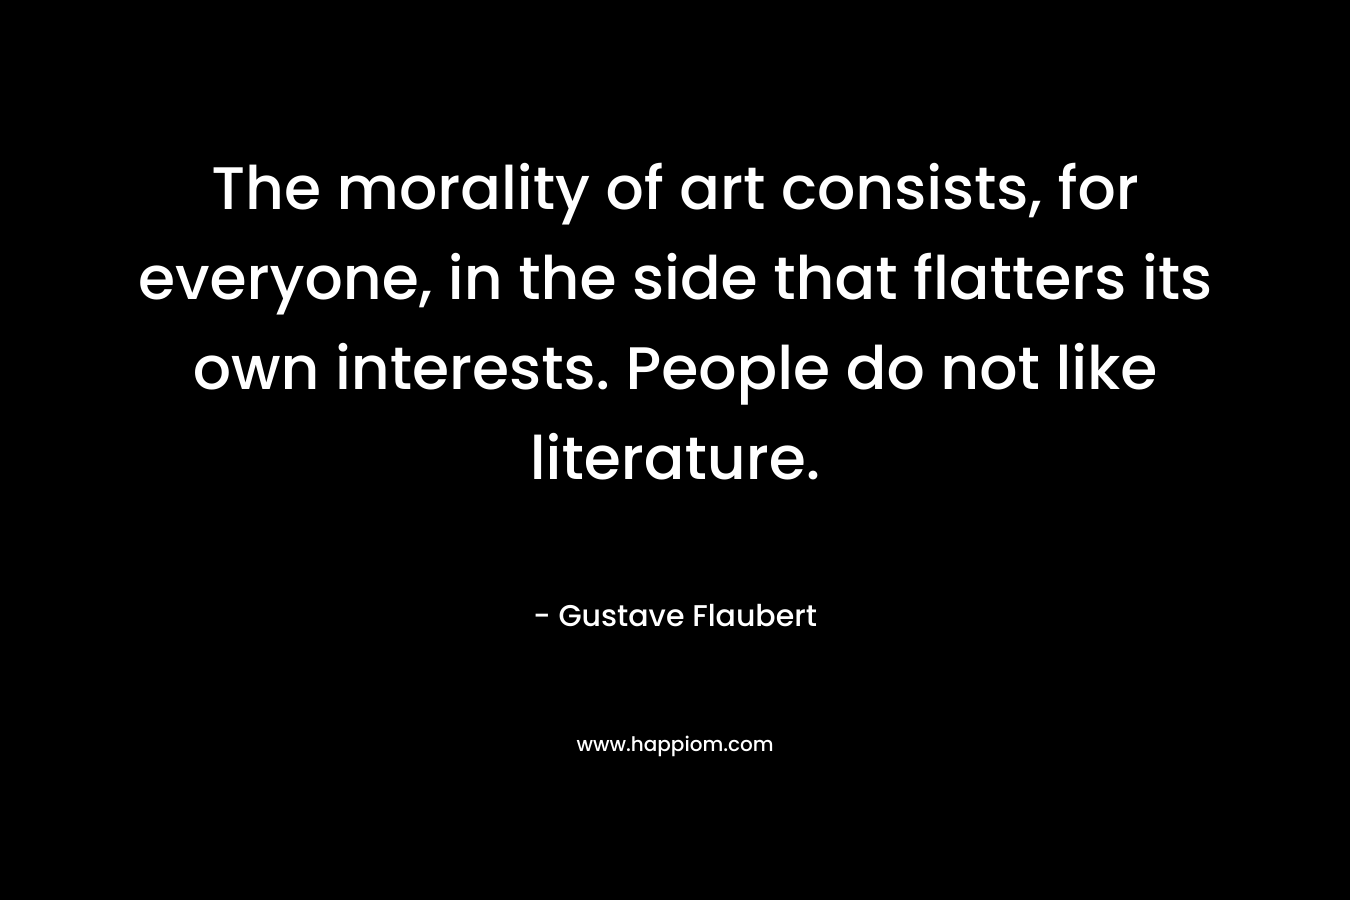 The morality of art consists, for everyone, in the side that flatters its own interests. People do not like literature.